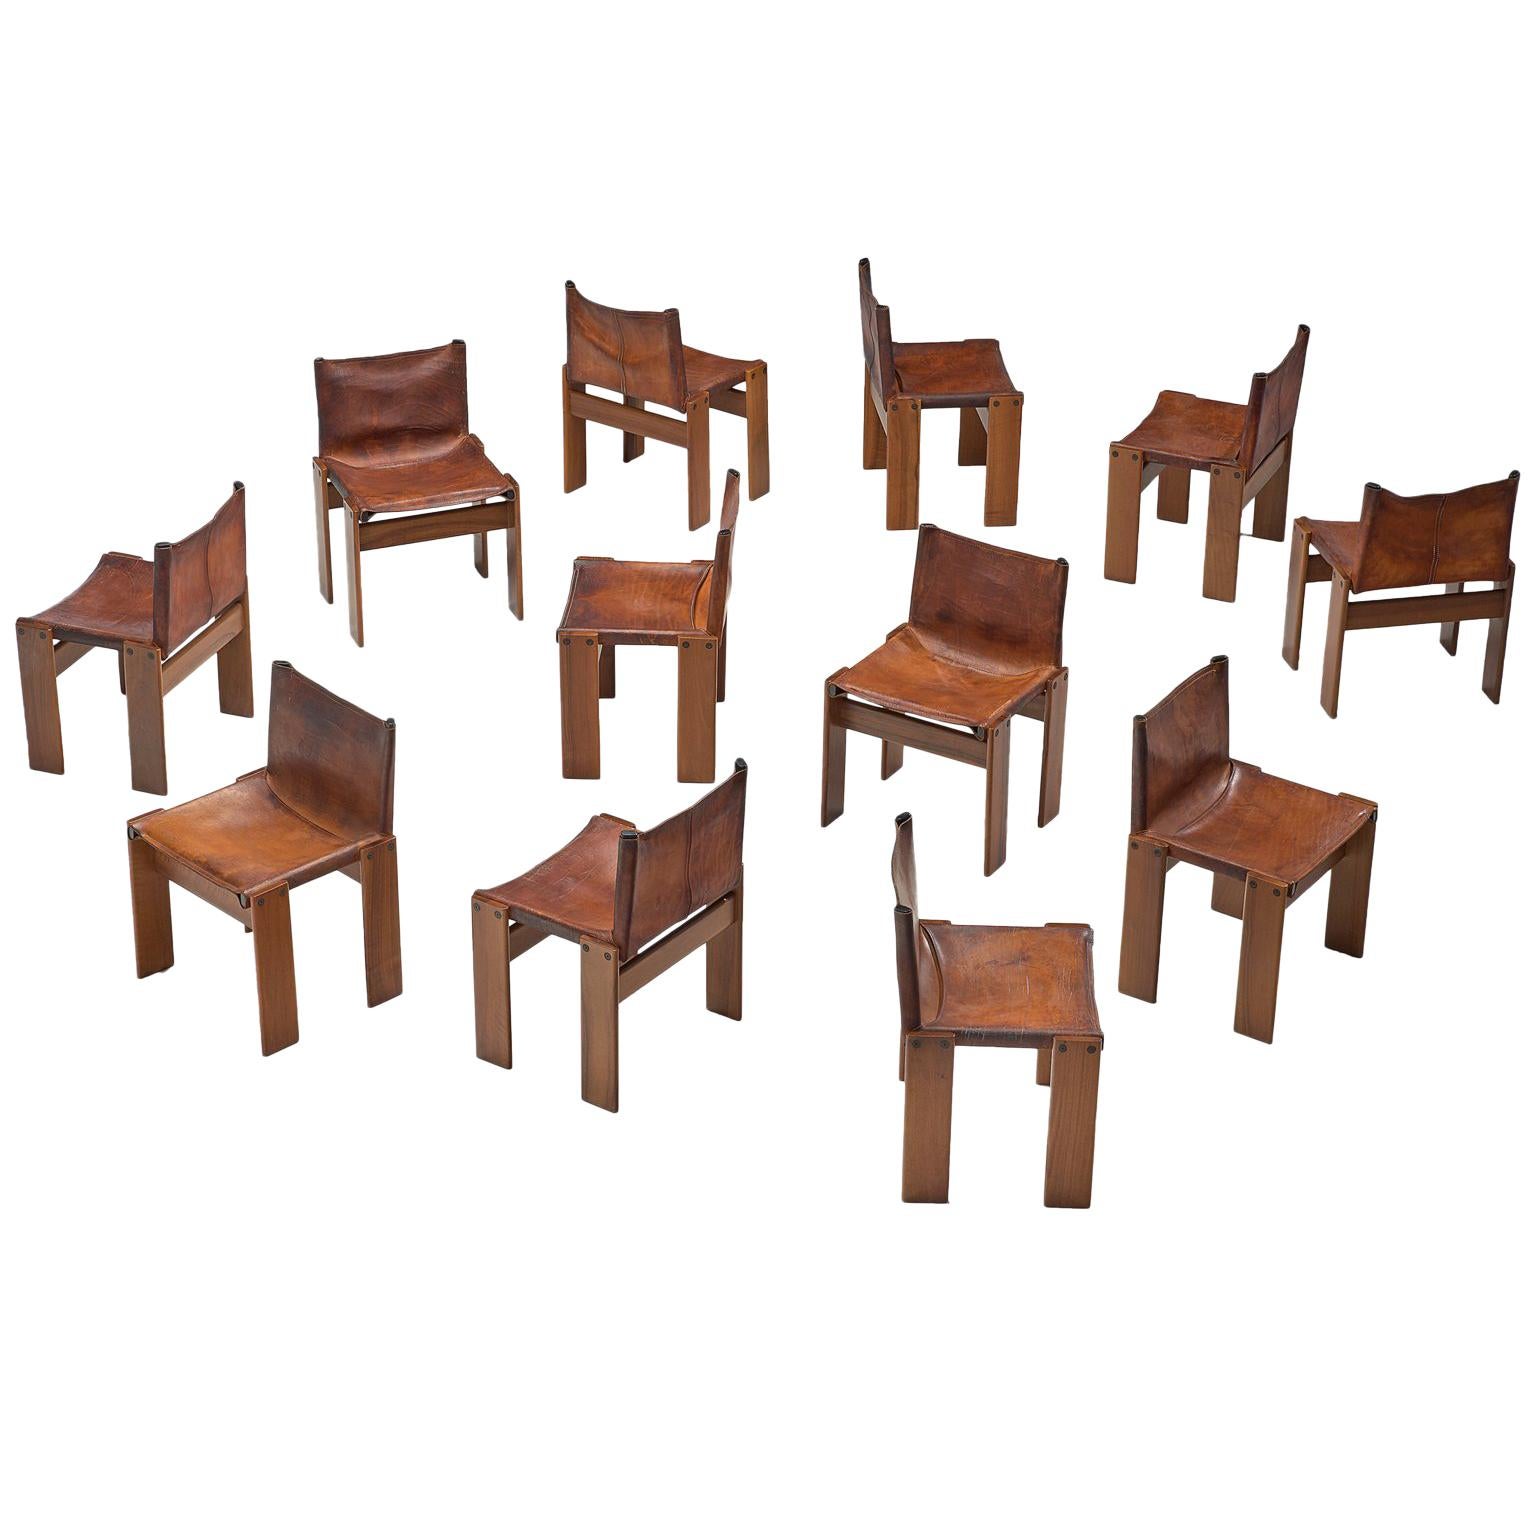 Scarpa Set of Twelve 'Monk' Chairs in Patinated Cognac Leather